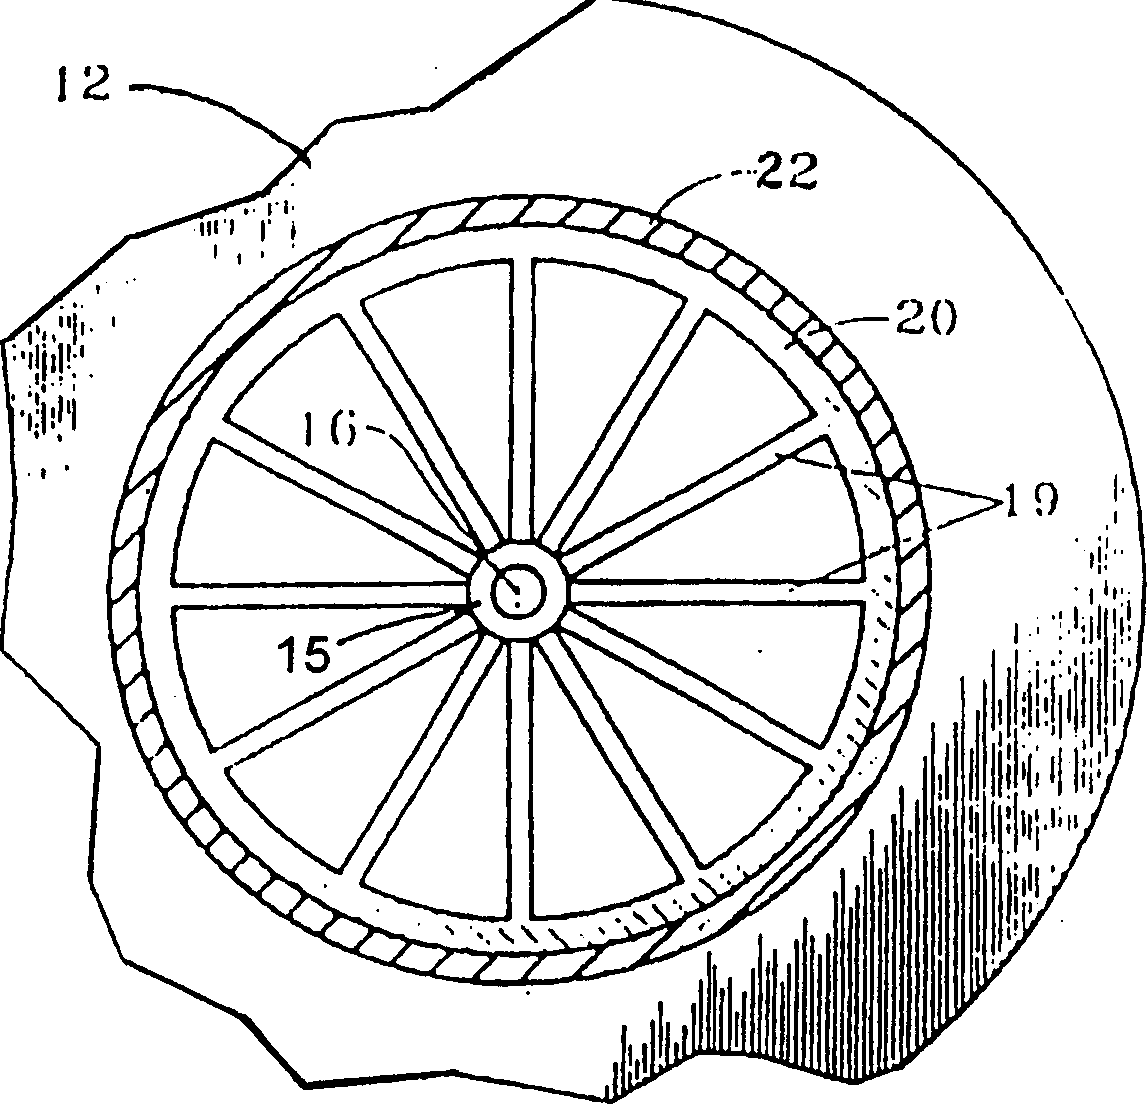 Reel for supporting composite coiled tubing